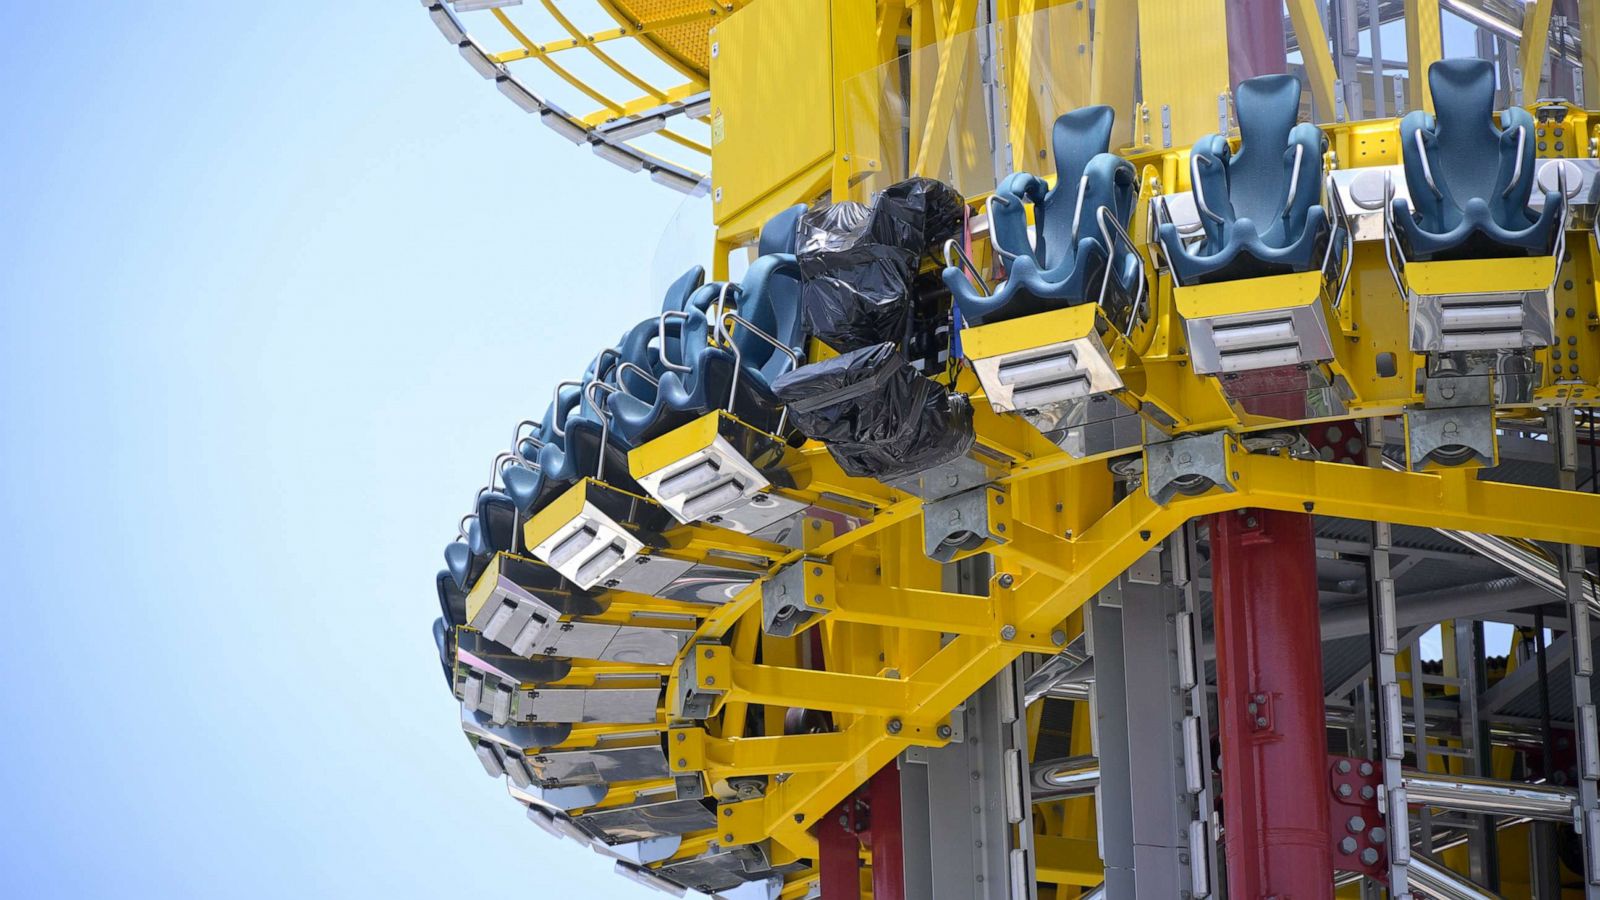 Orlando FreeFall ride to be taken down after teen's fatal fall - ABC News